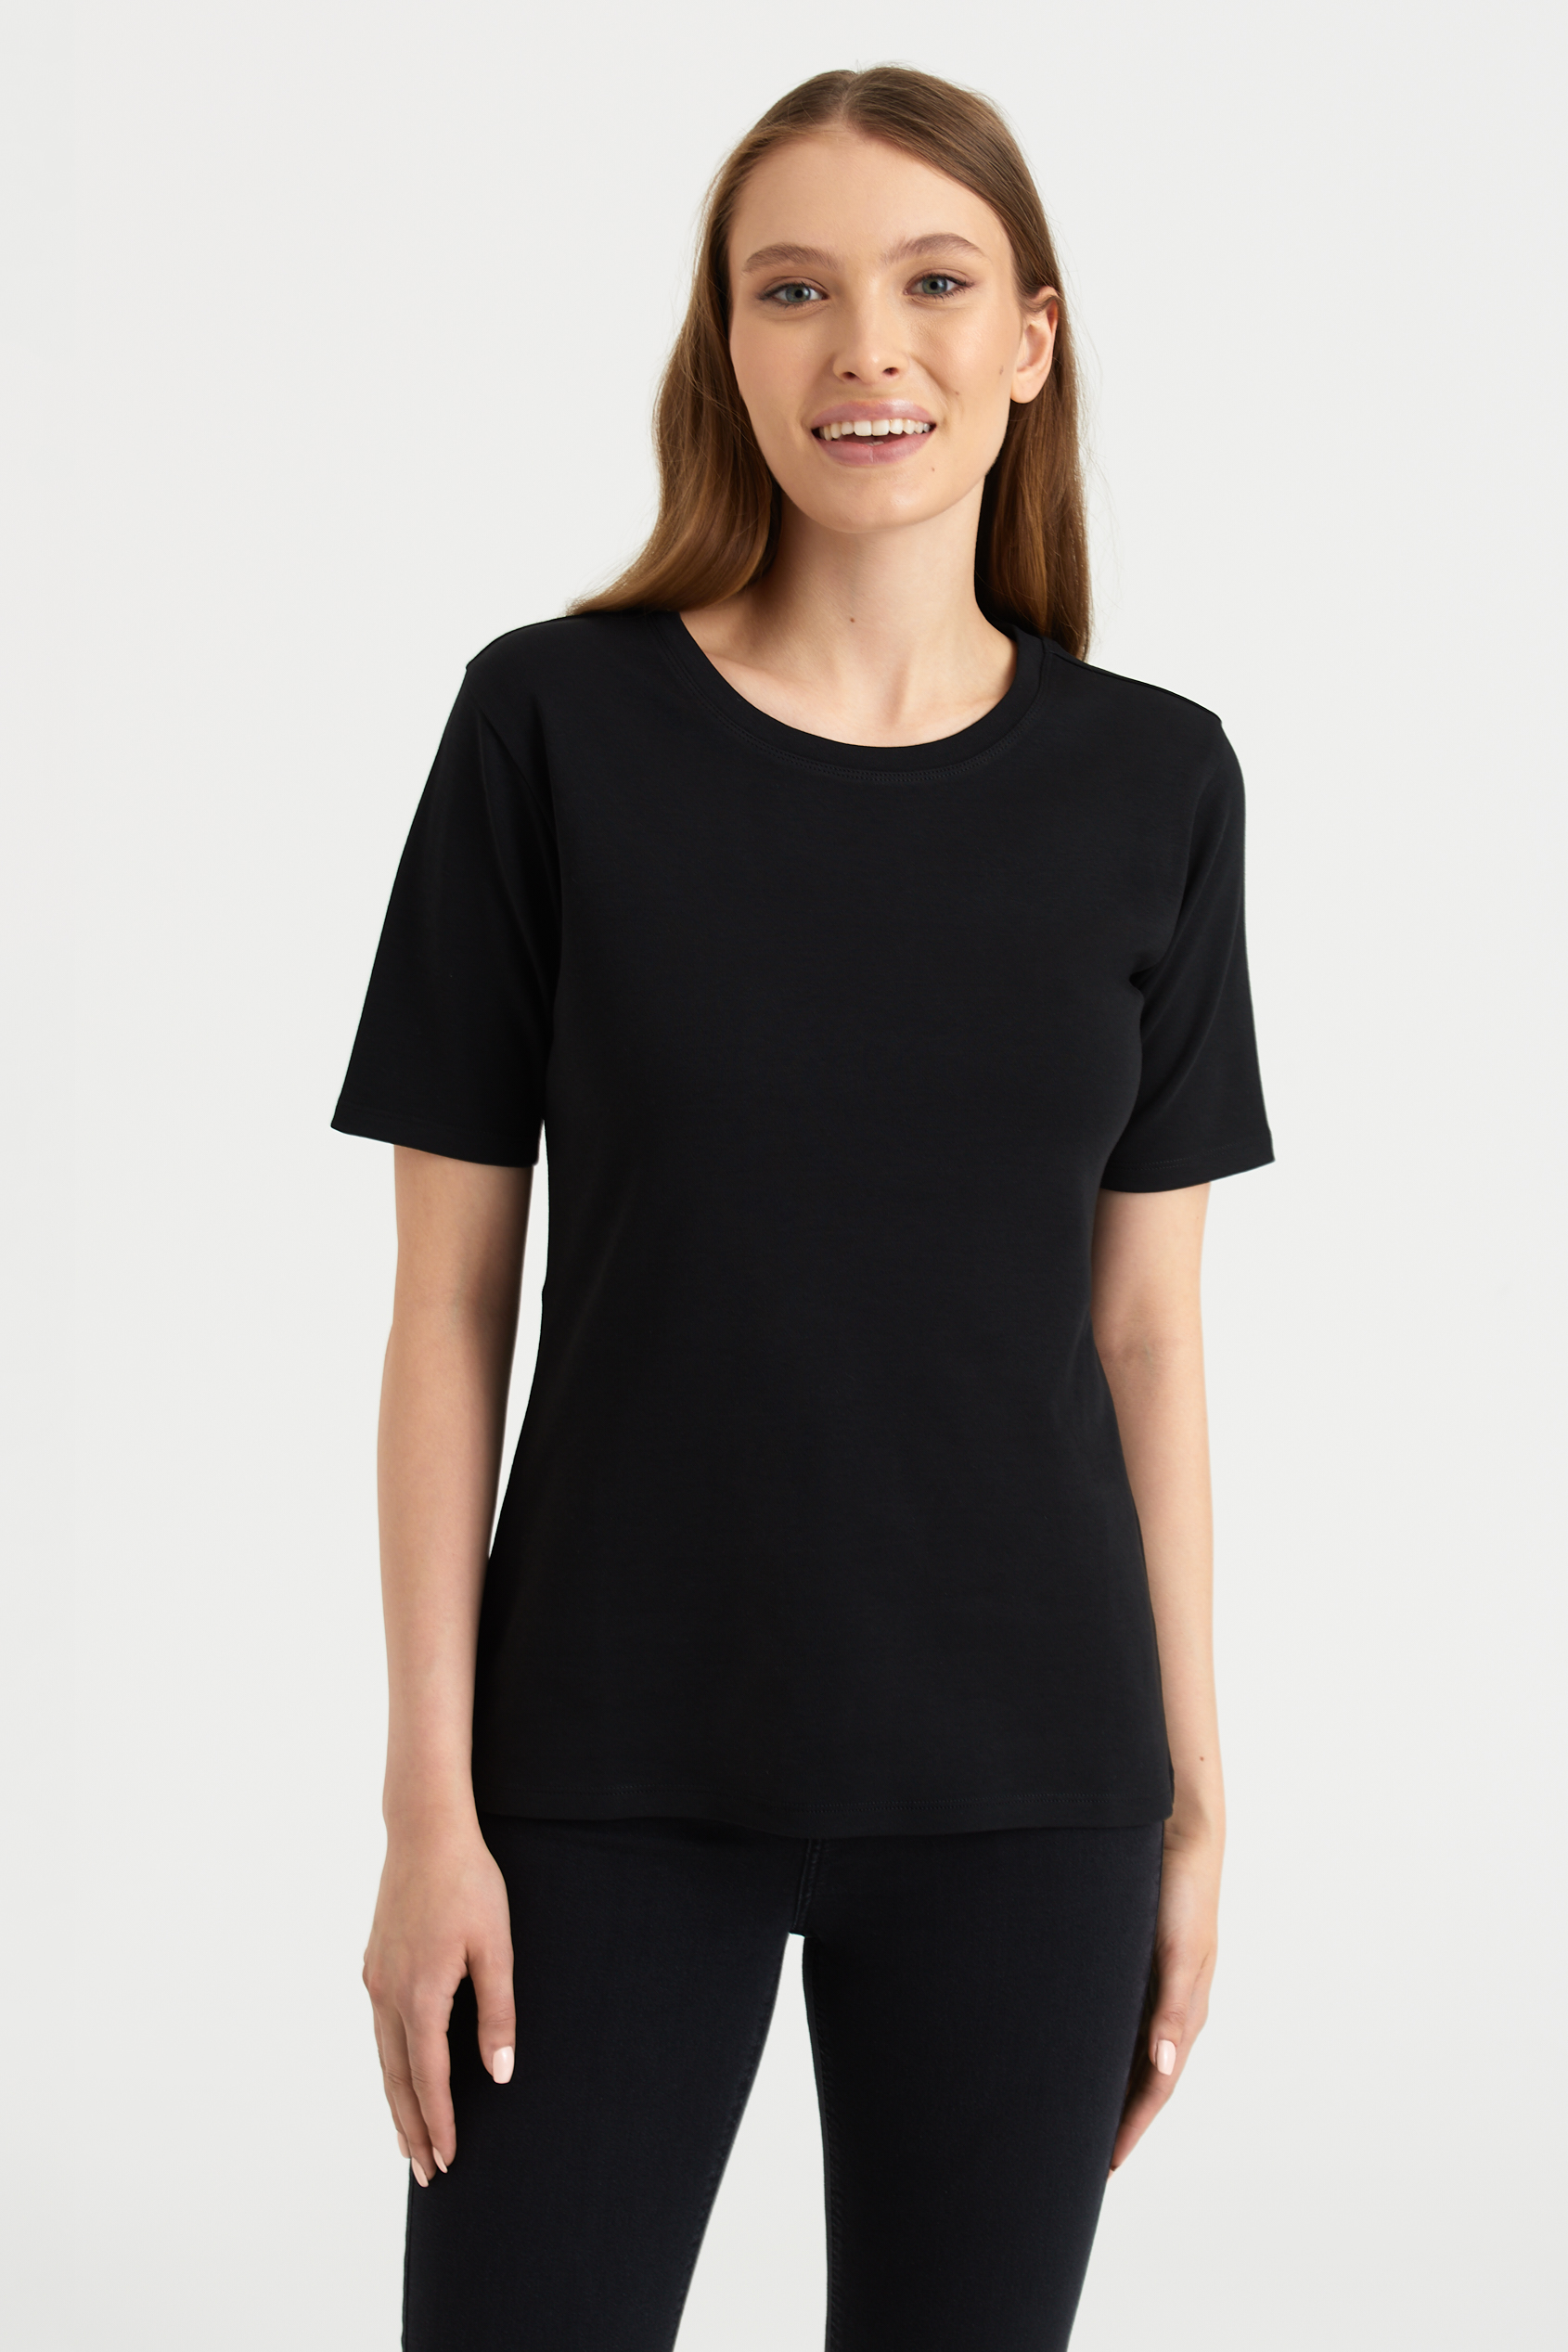 Greenpoint Woman's Blouse TOP705W2299X00